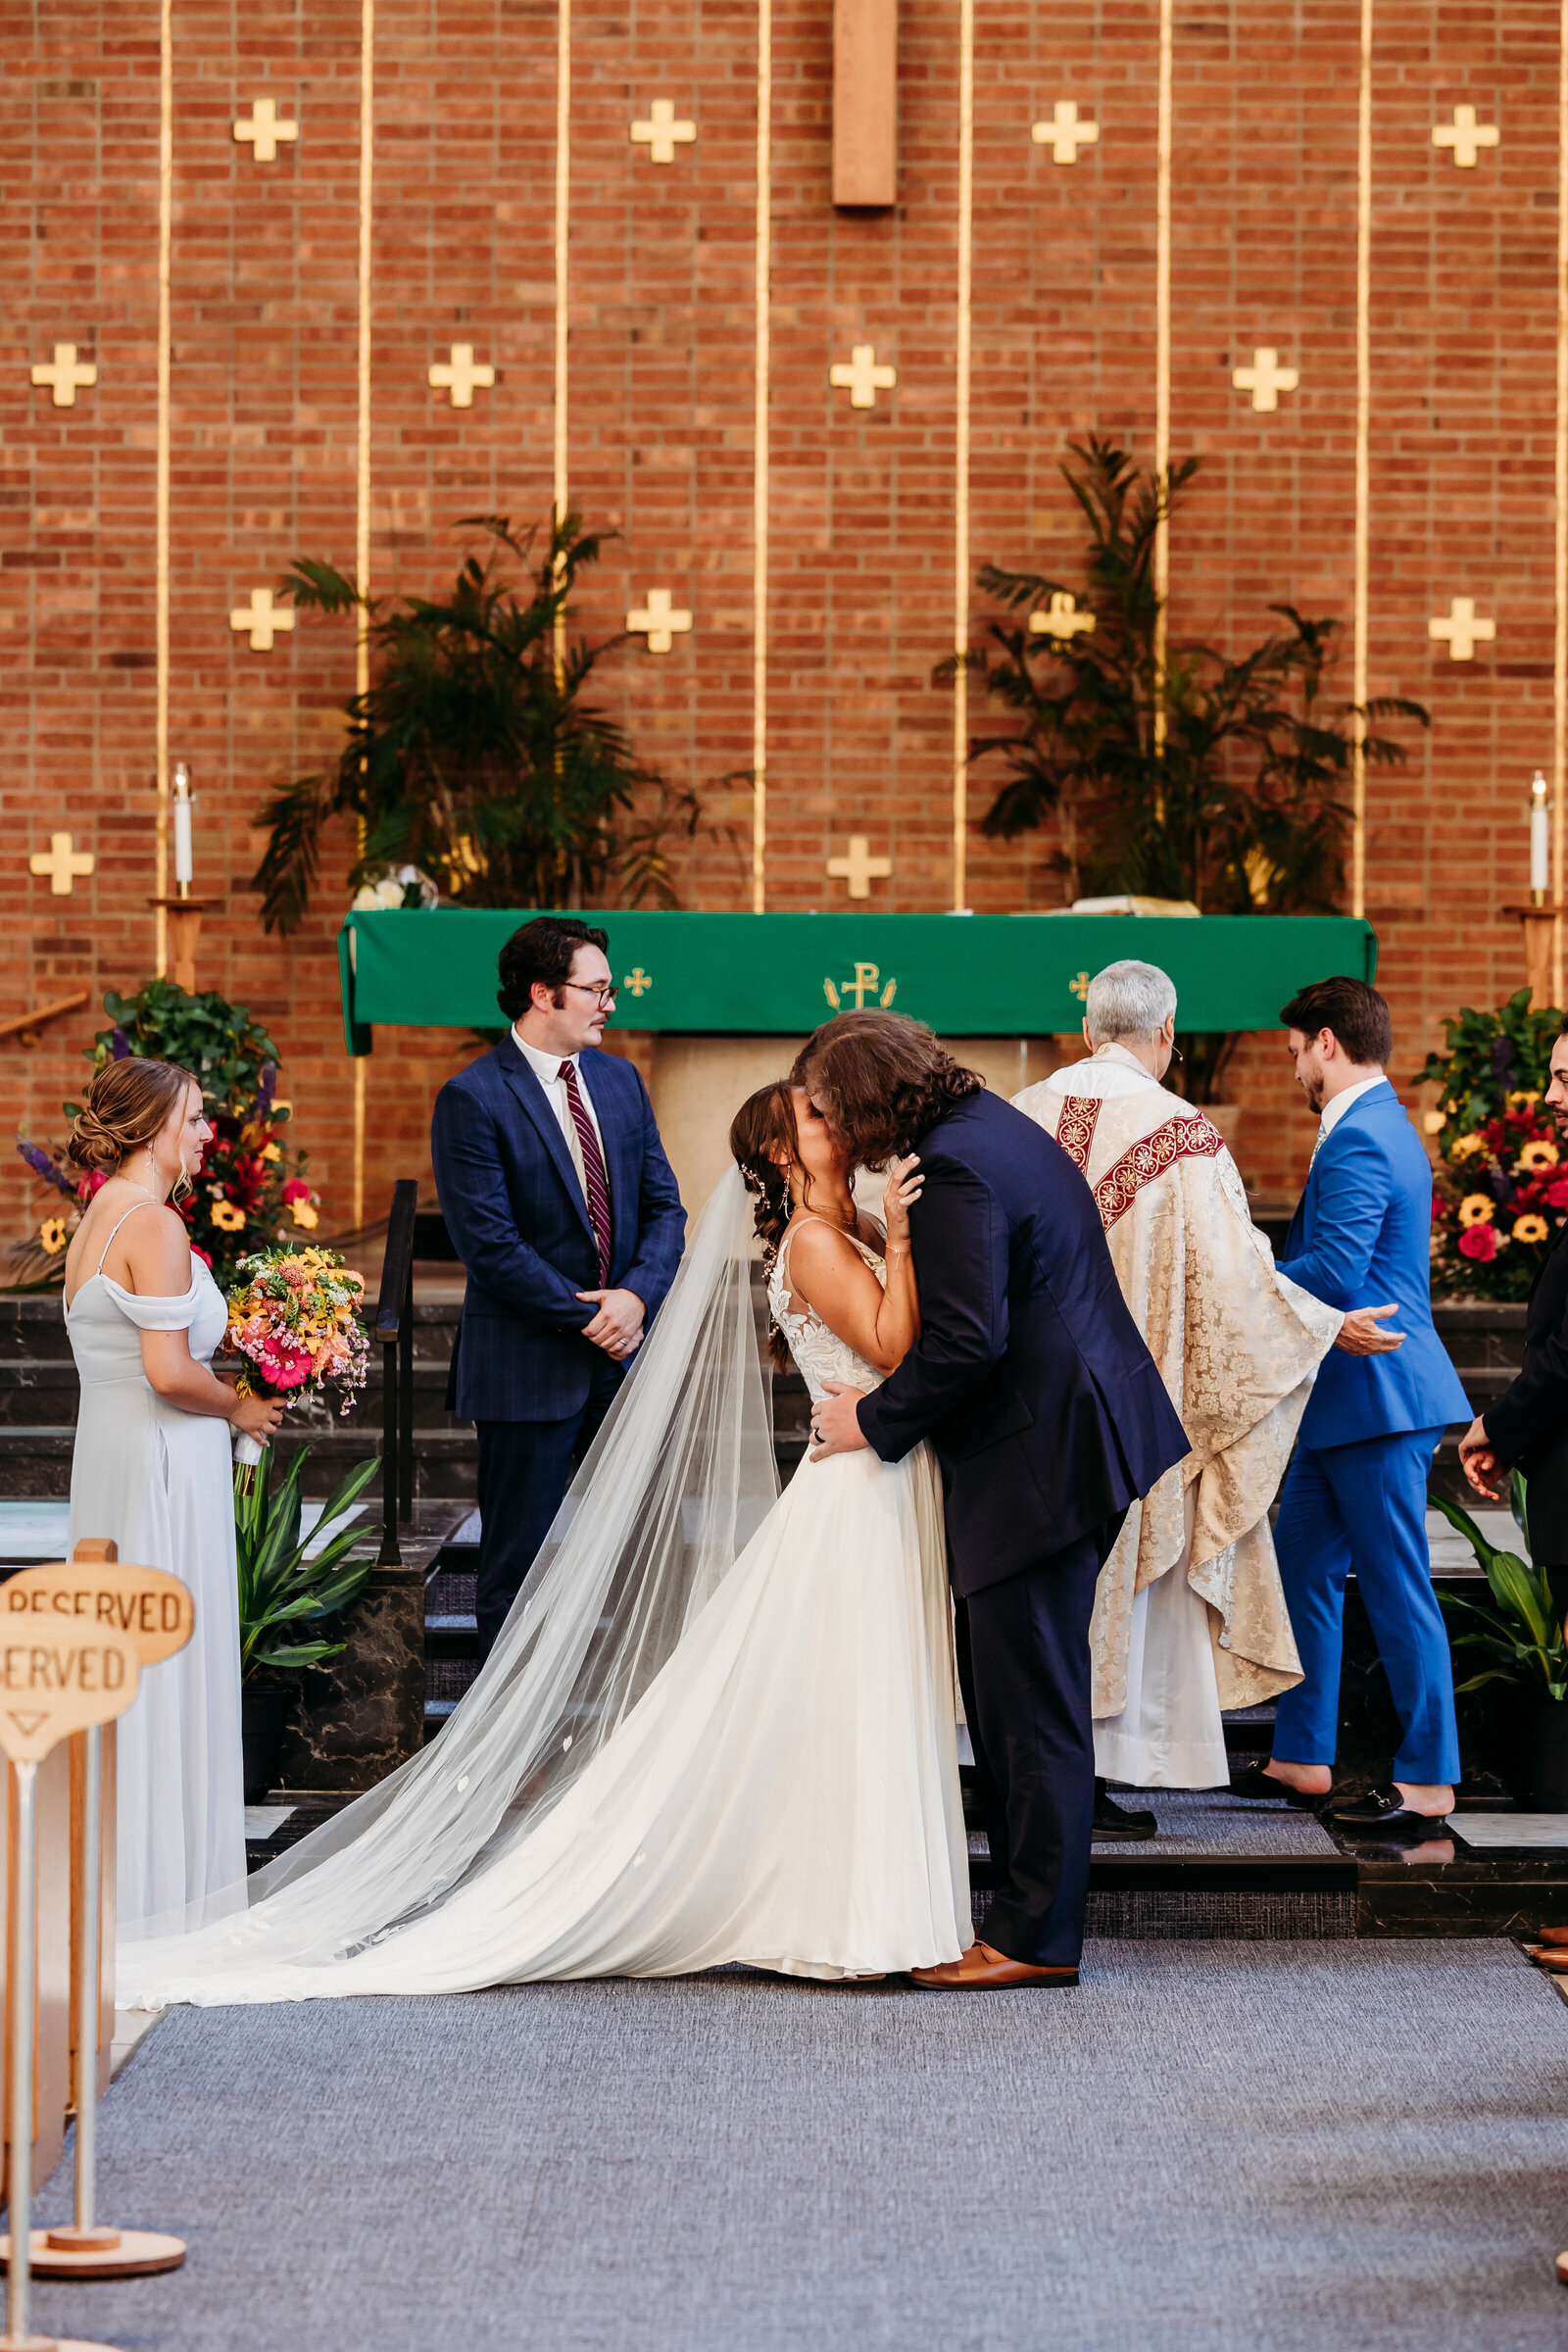 The bride and groom share their first kiss during there wedding ceremony at St. Luke's church